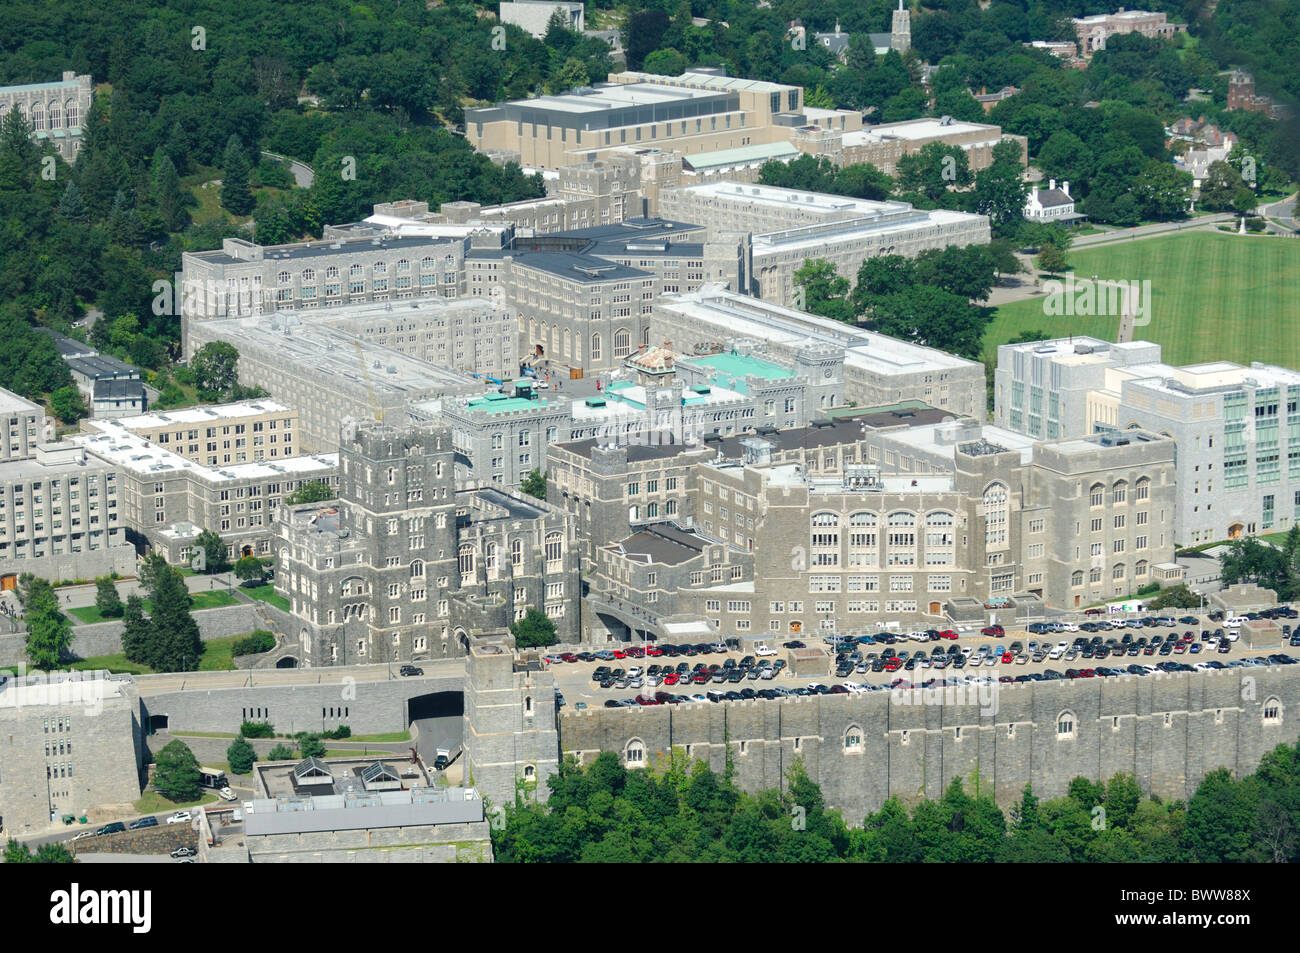 Aerial view of United States Military Academy buildings of West Point, New  York state, Usa Stock Photo - Alamy